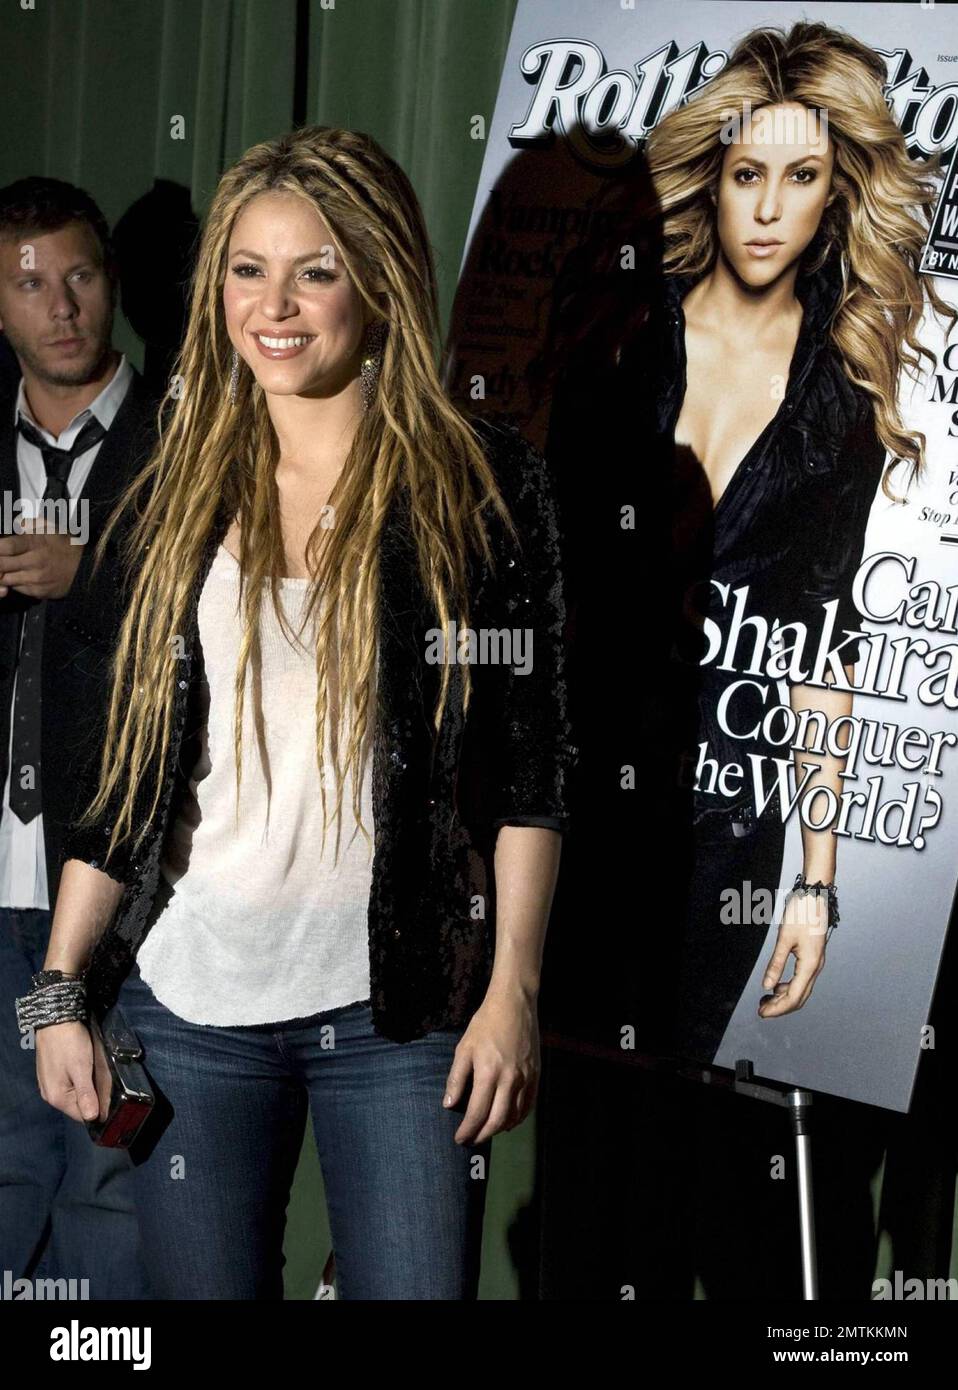 Shakira celebrates her "Rolling Stone" magazine cover and the debut of "She  Wolf" with a VIP celebration at The Bowery Hotel in New York, NY. 11/9/09  Stock Photo - Alamy